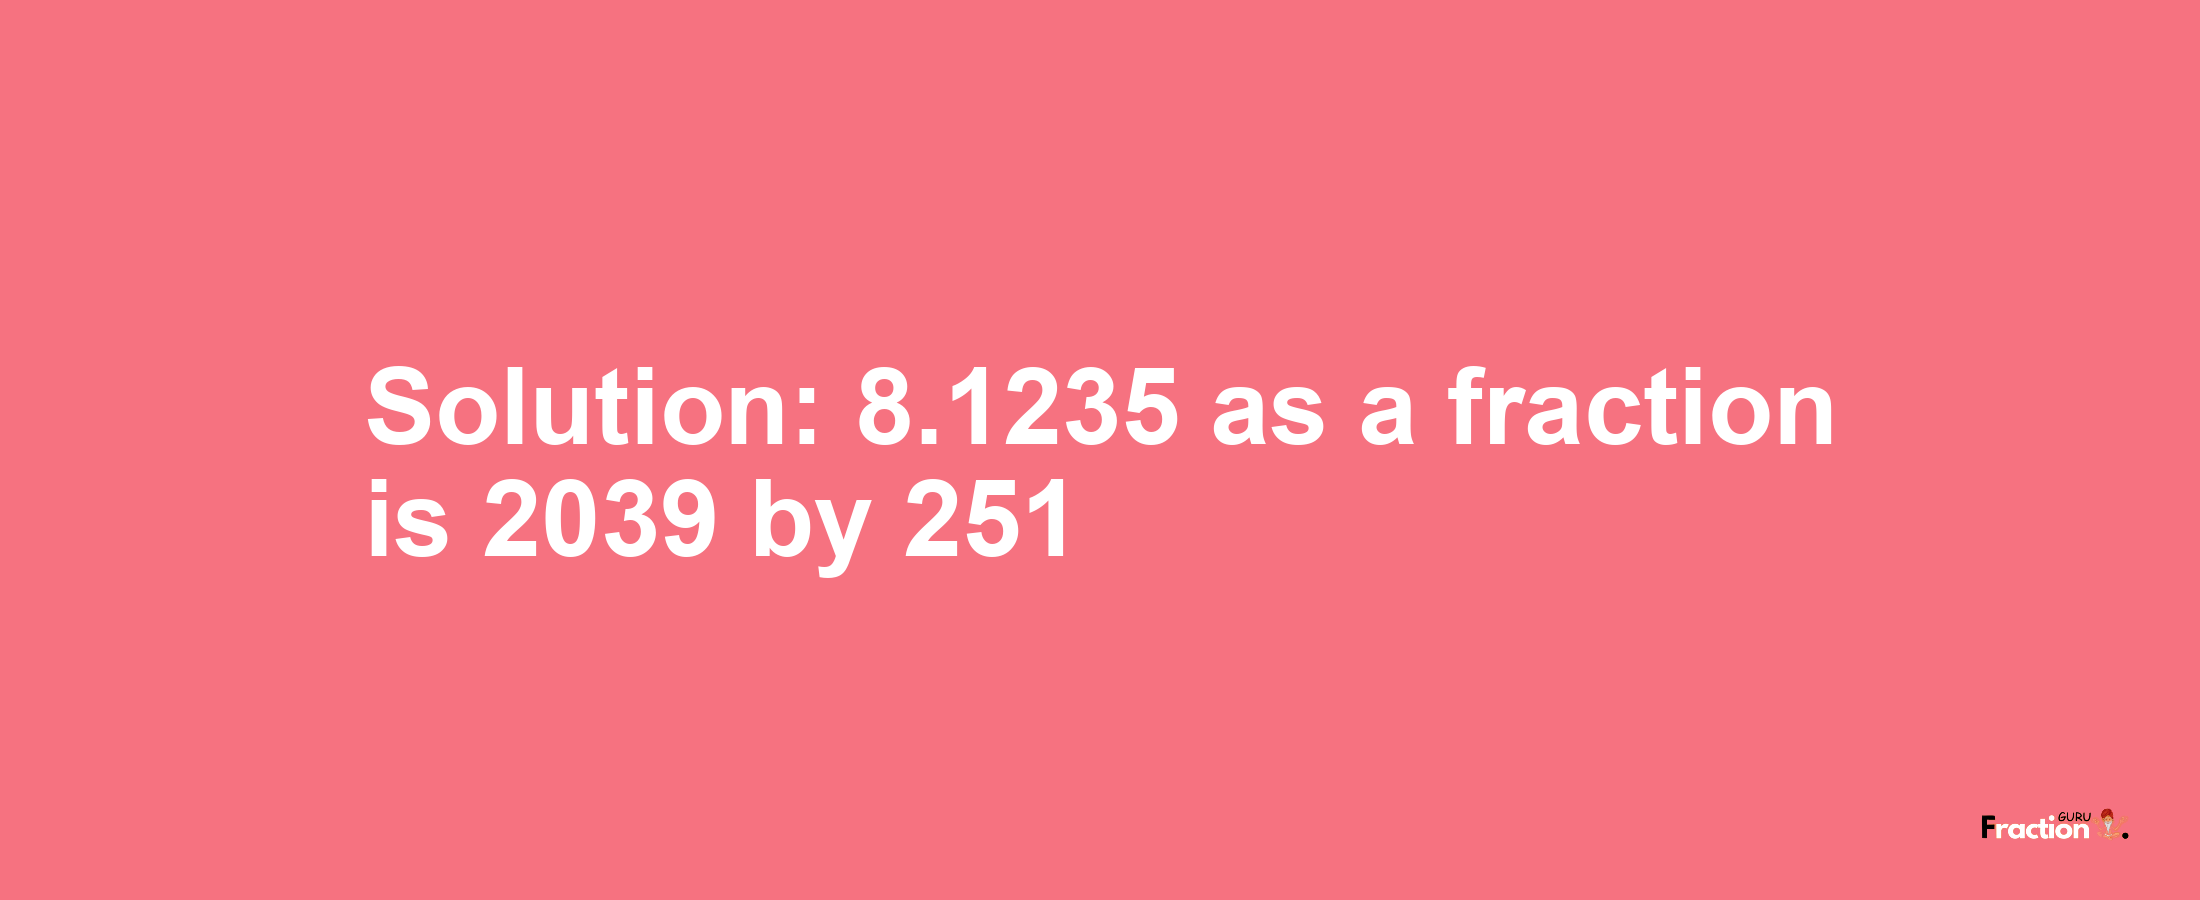 Solution:8.1235 as a fraction is 2039/251